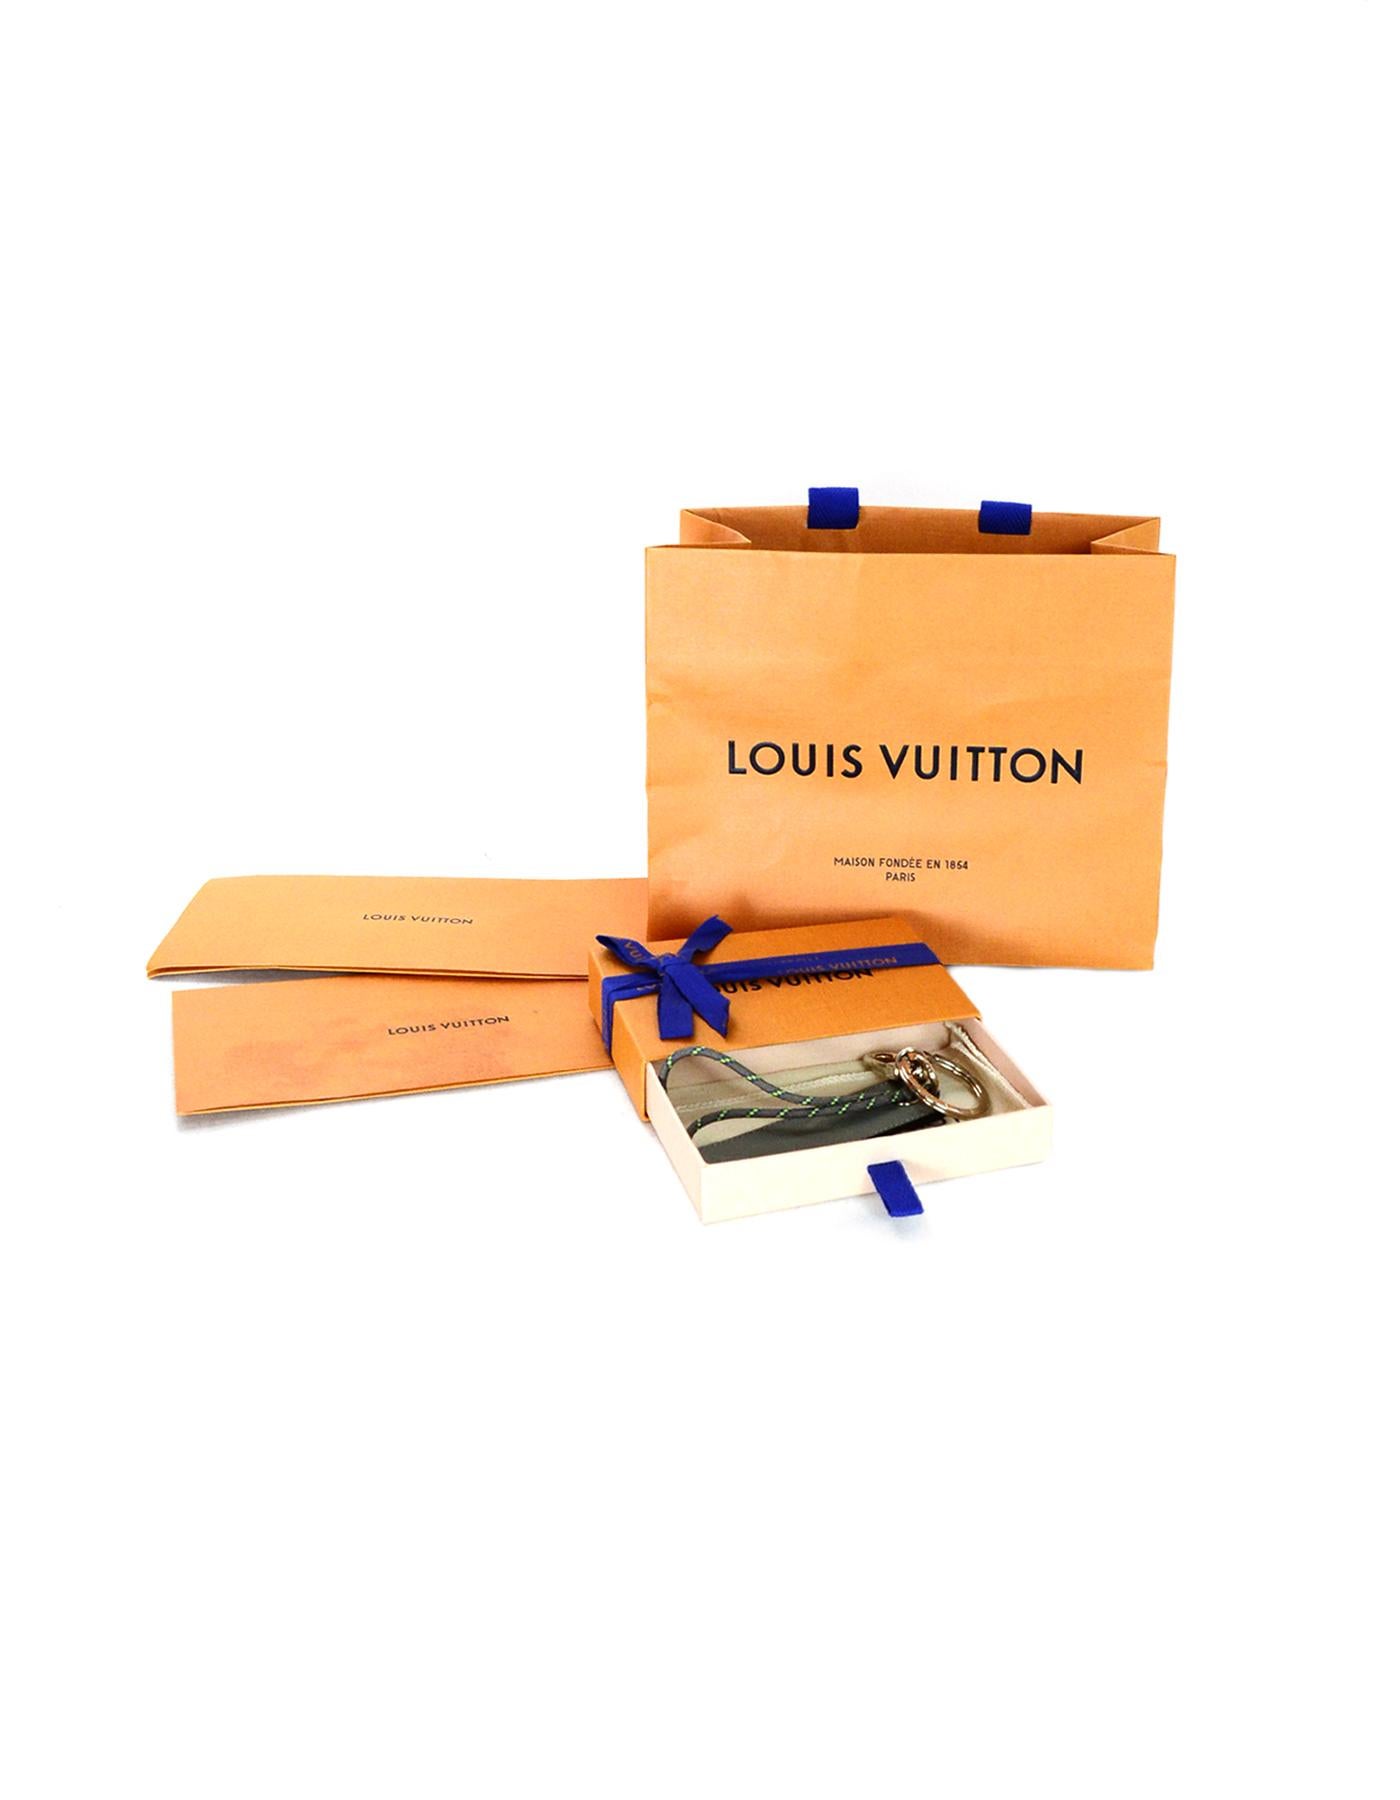 Louis Vuitton 2018 Grey LV Monogram Titanium Fluo Tab Bag Charm/Key Ring Unisex

Made In: Italy
Year of Production: 2018
Color: Grey
Materials: Leather and metal 
Hallmarks:  